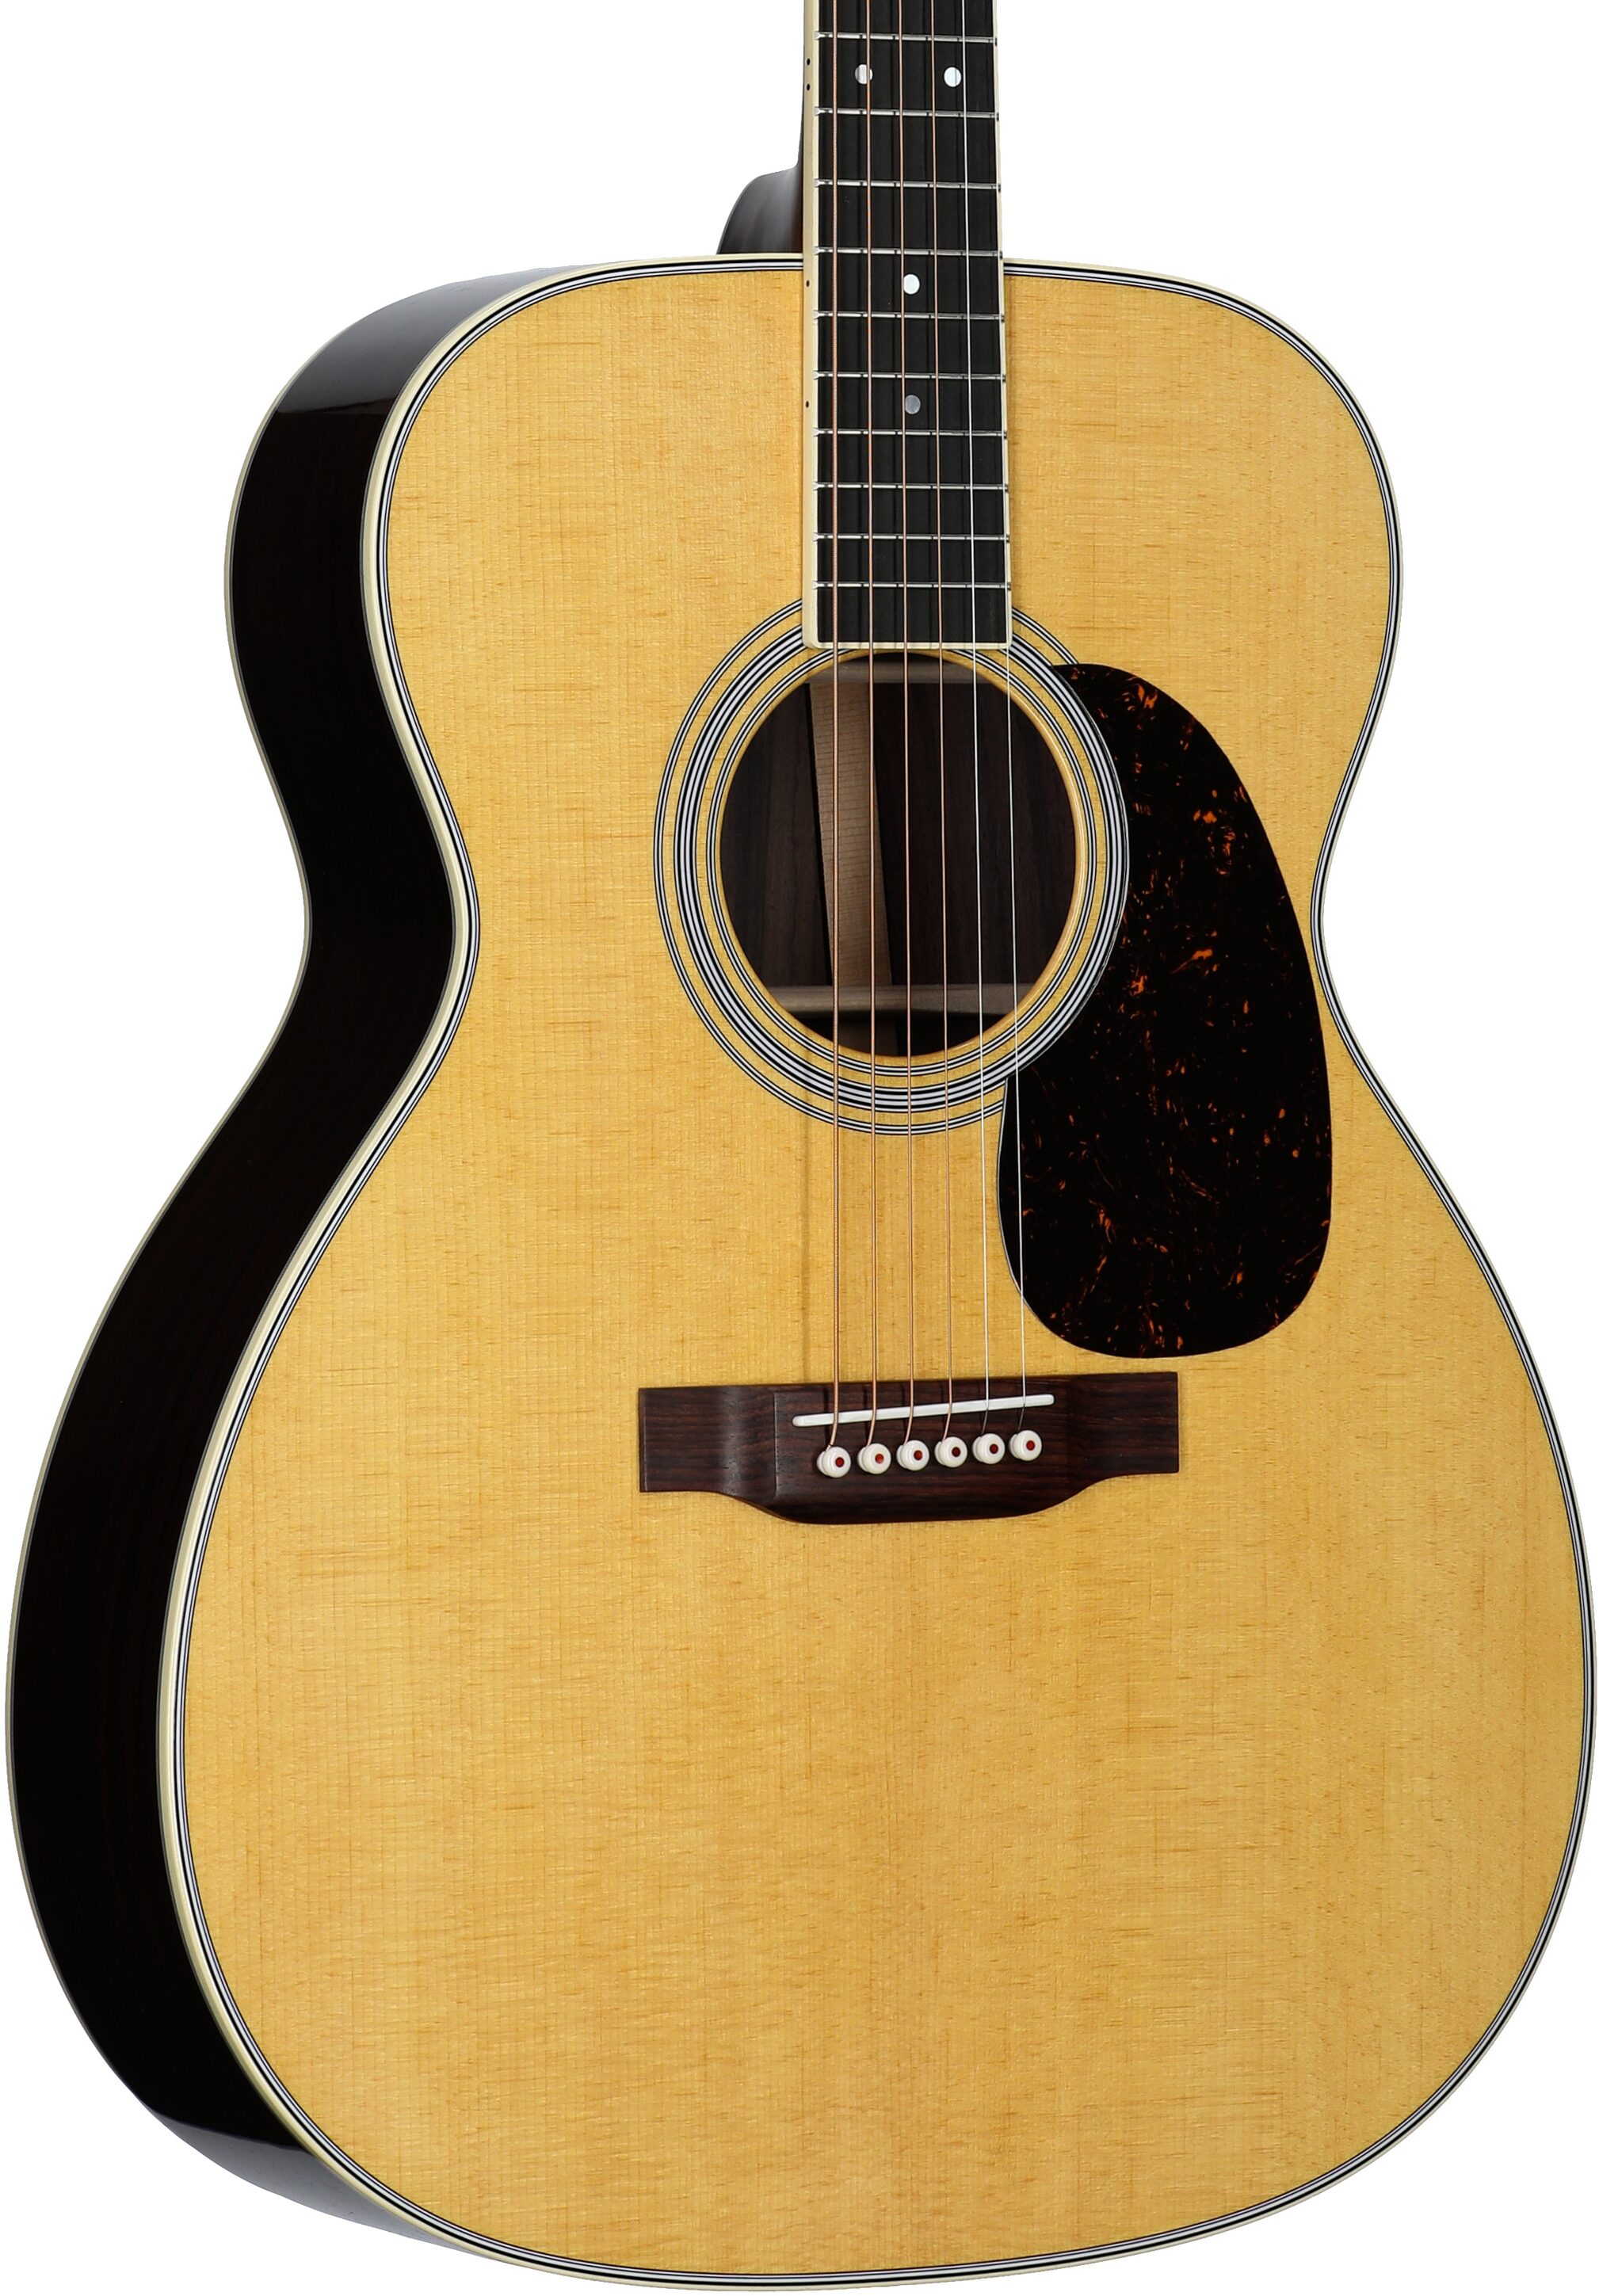 Martin M-36 Redesign Acoustic Guitar (with Case)